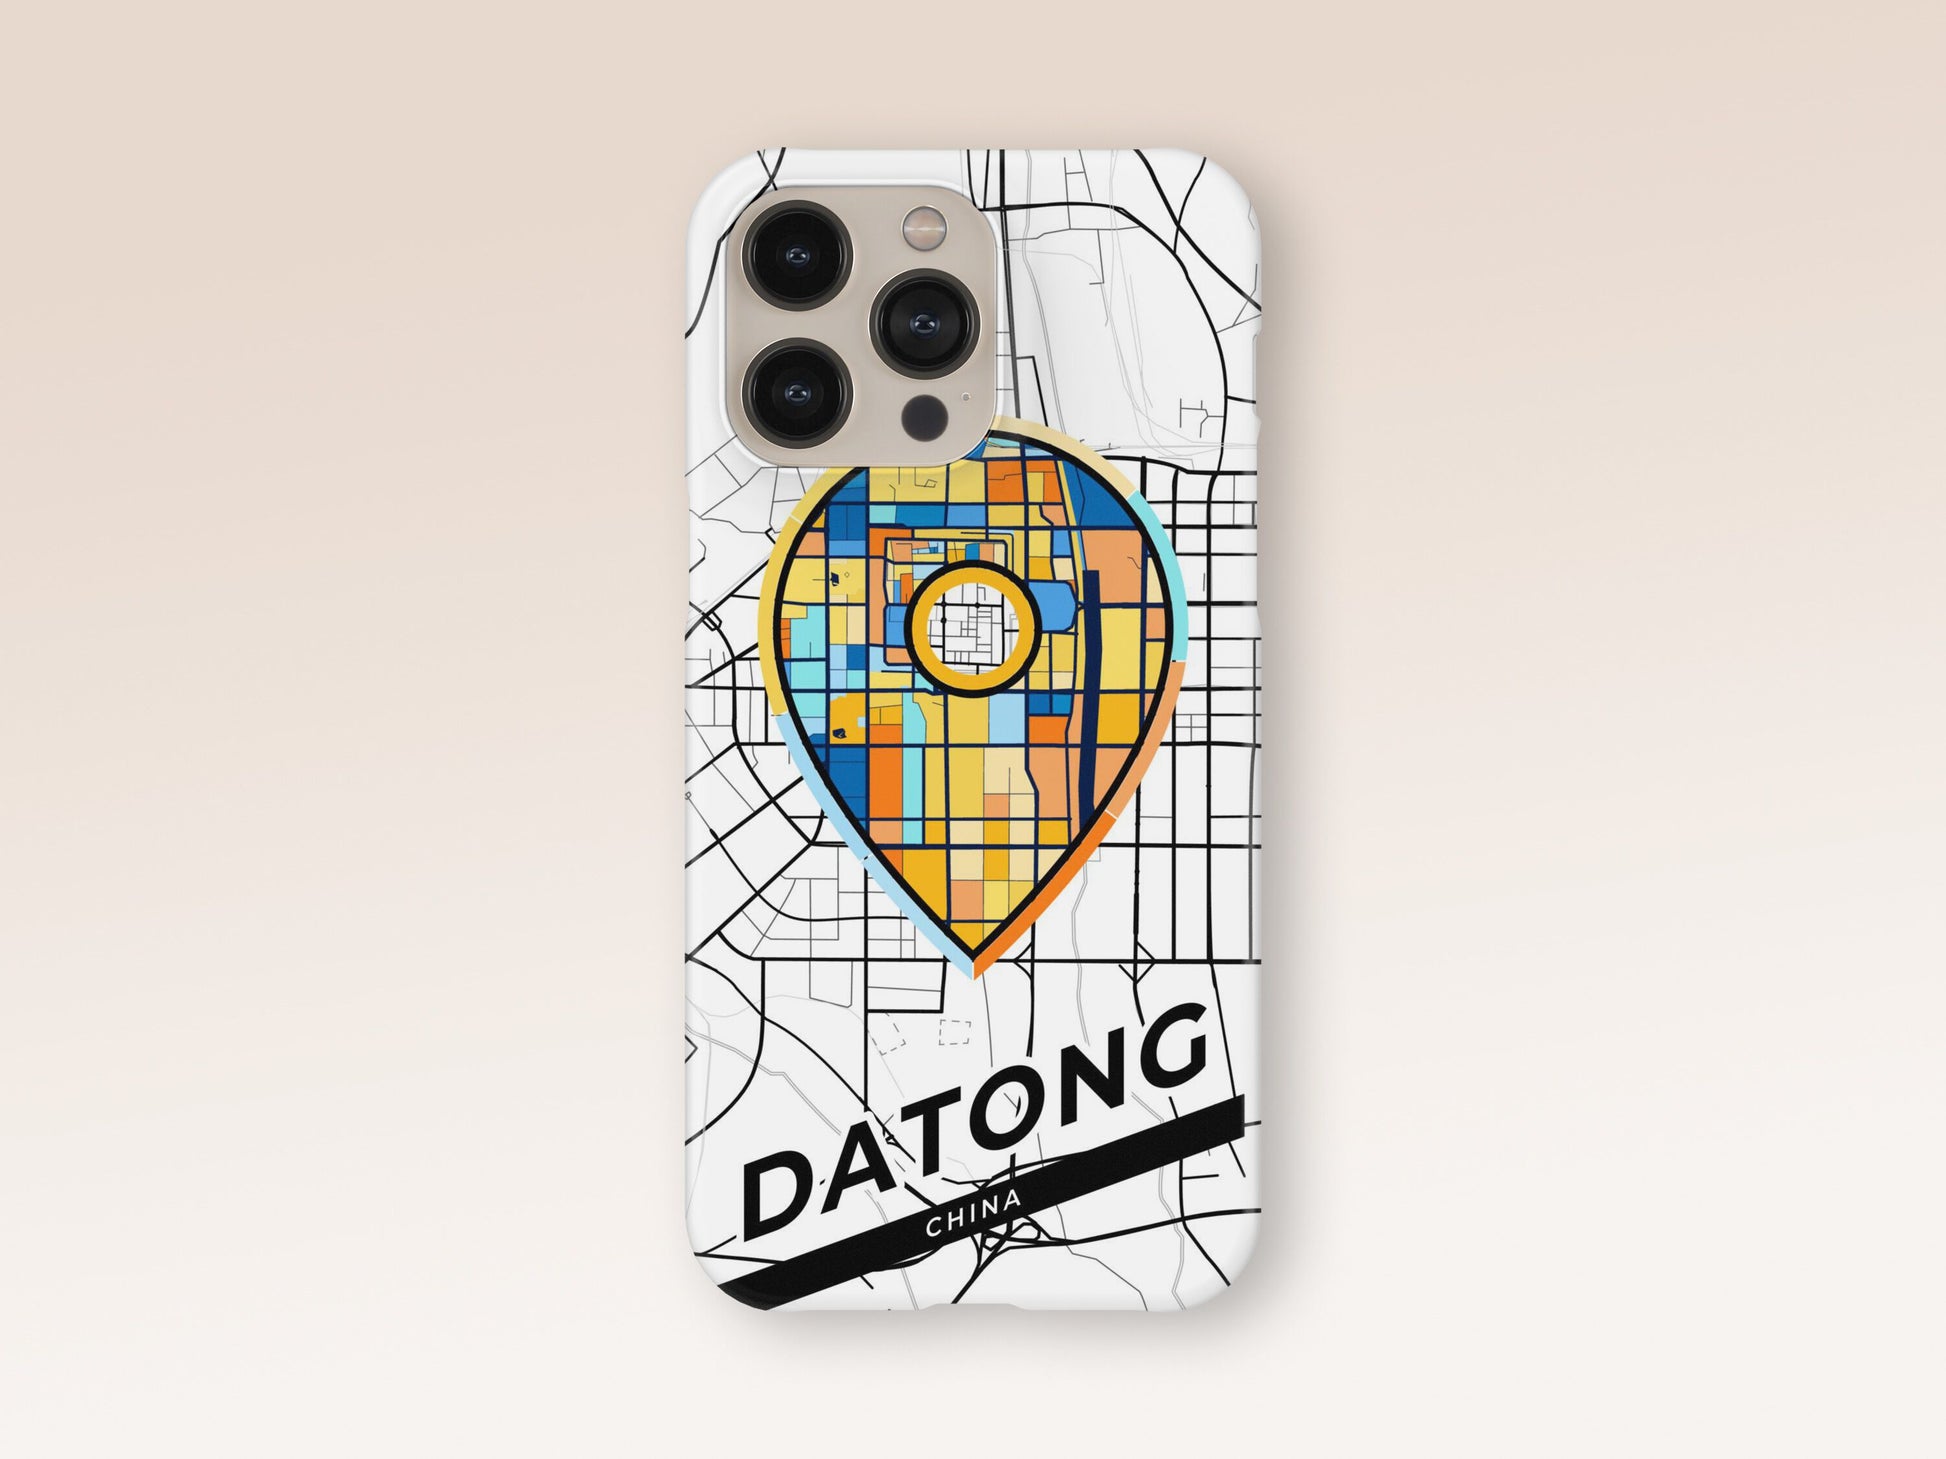 Datong China slim phone case with colorful icon. Birthday, wedding or housewarming gift. Couple match cases. 1